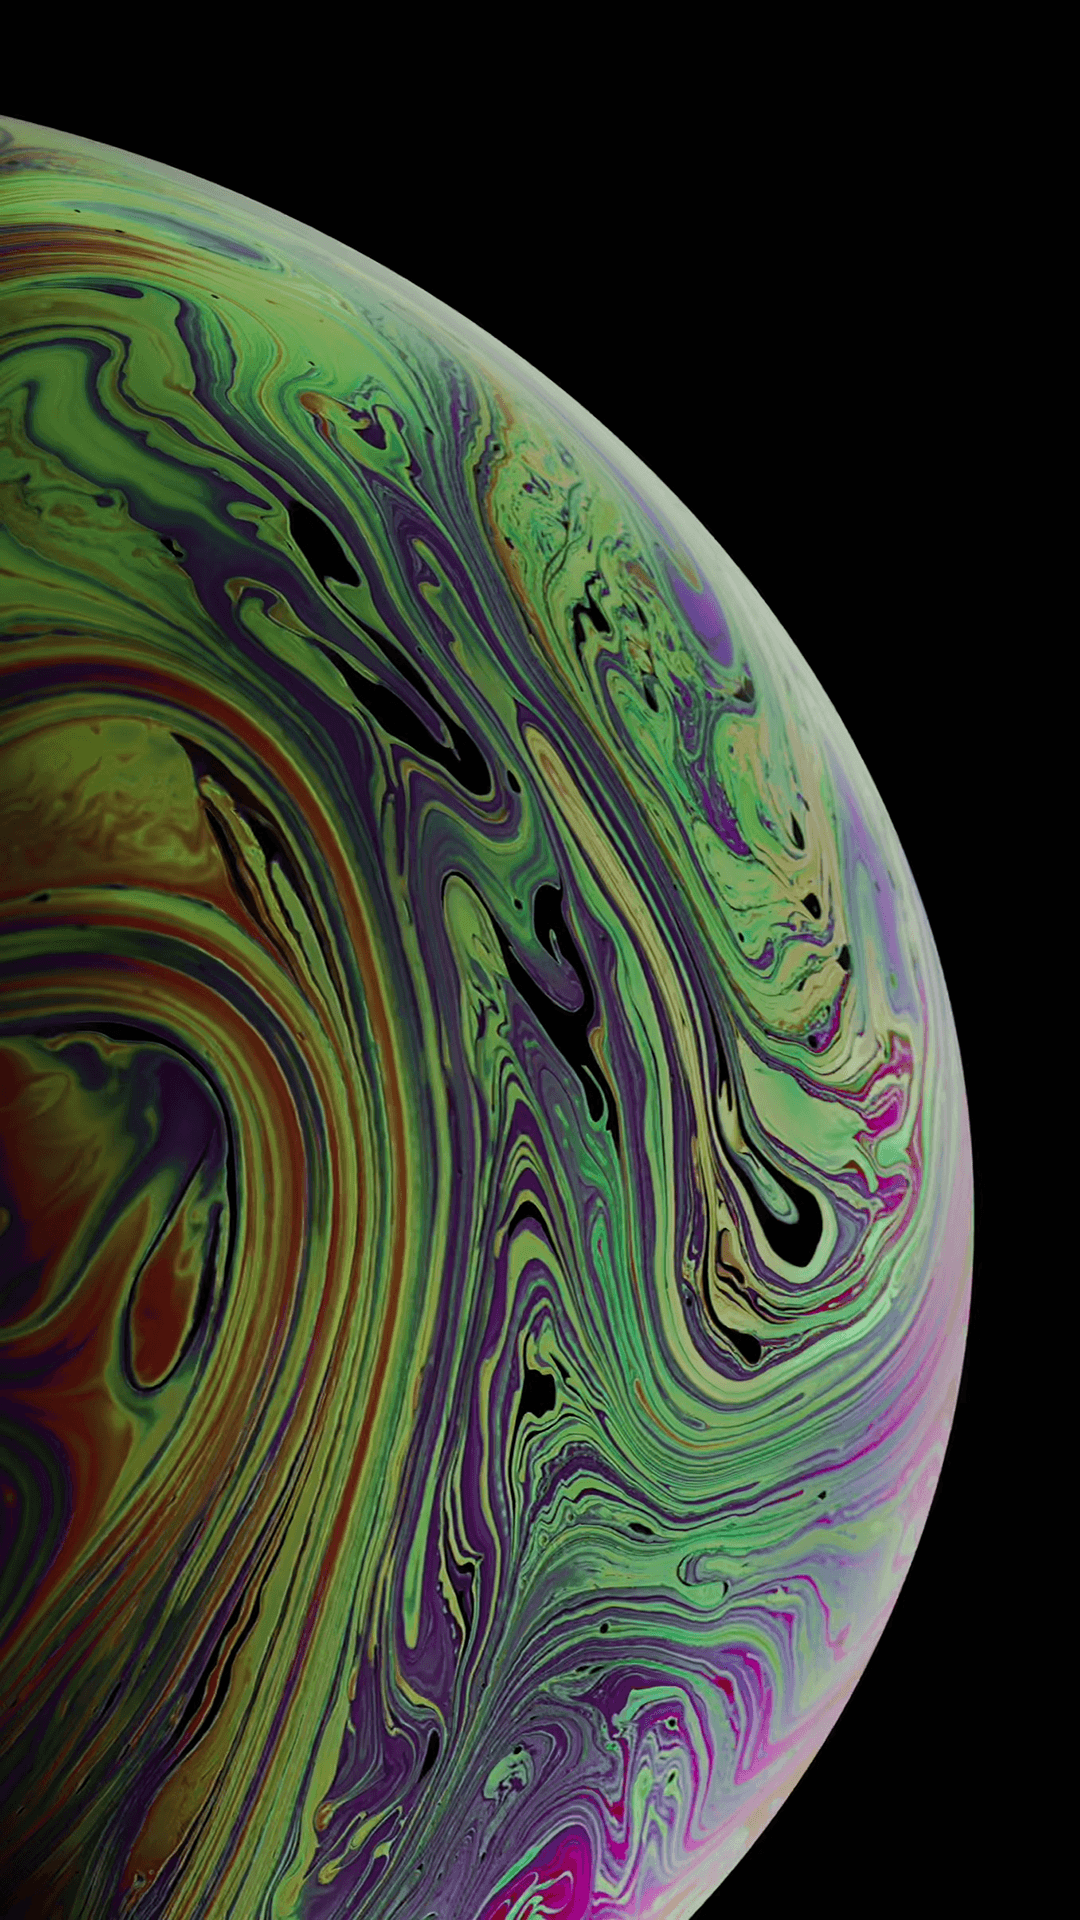 Wallpapers iPhone Xs, iPhone Xs Max, and iPhone Xr